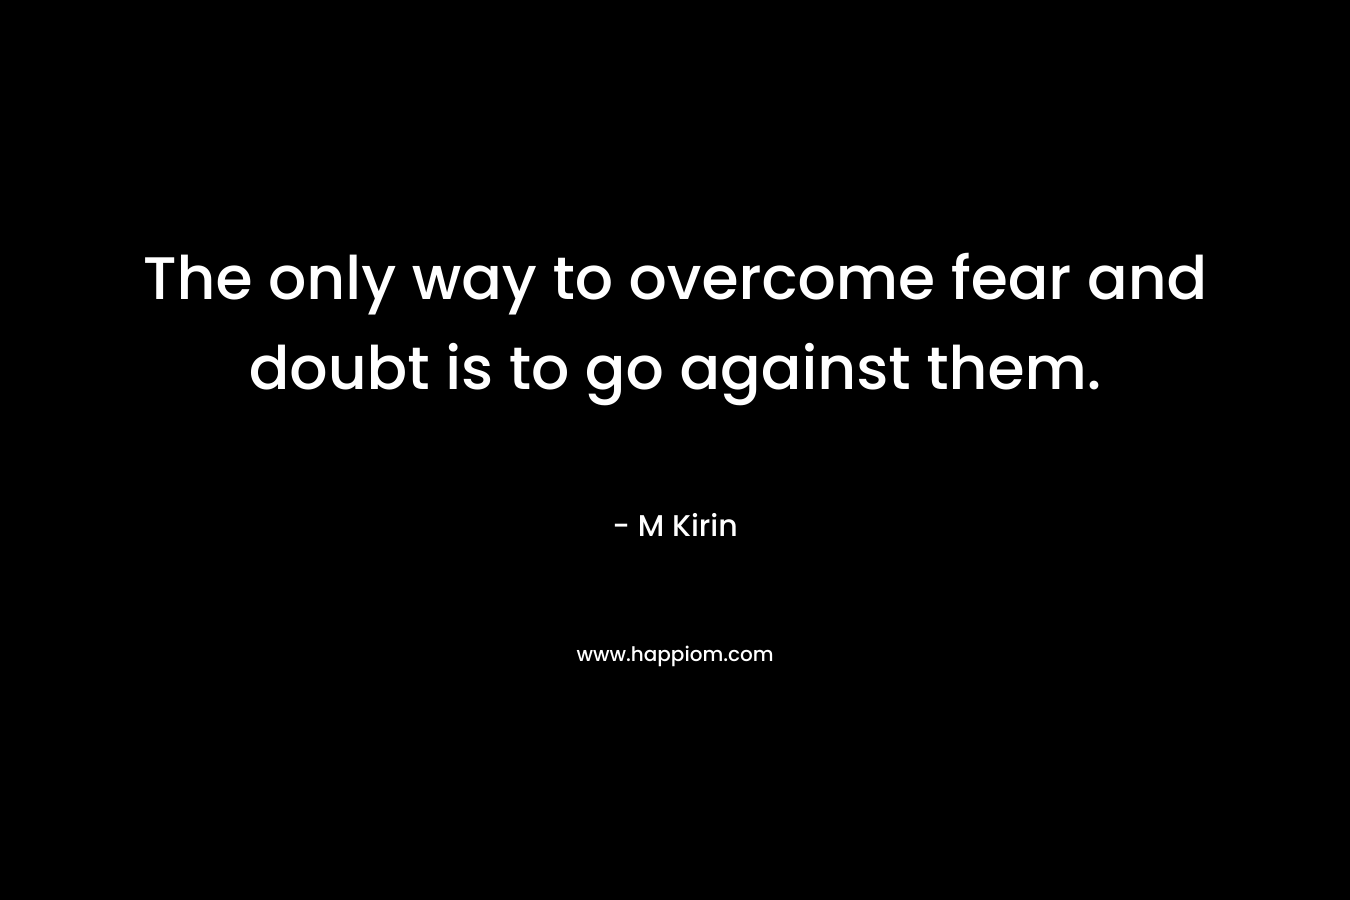 The only way to overcome fear and doubt is to go against them. – M Kirin